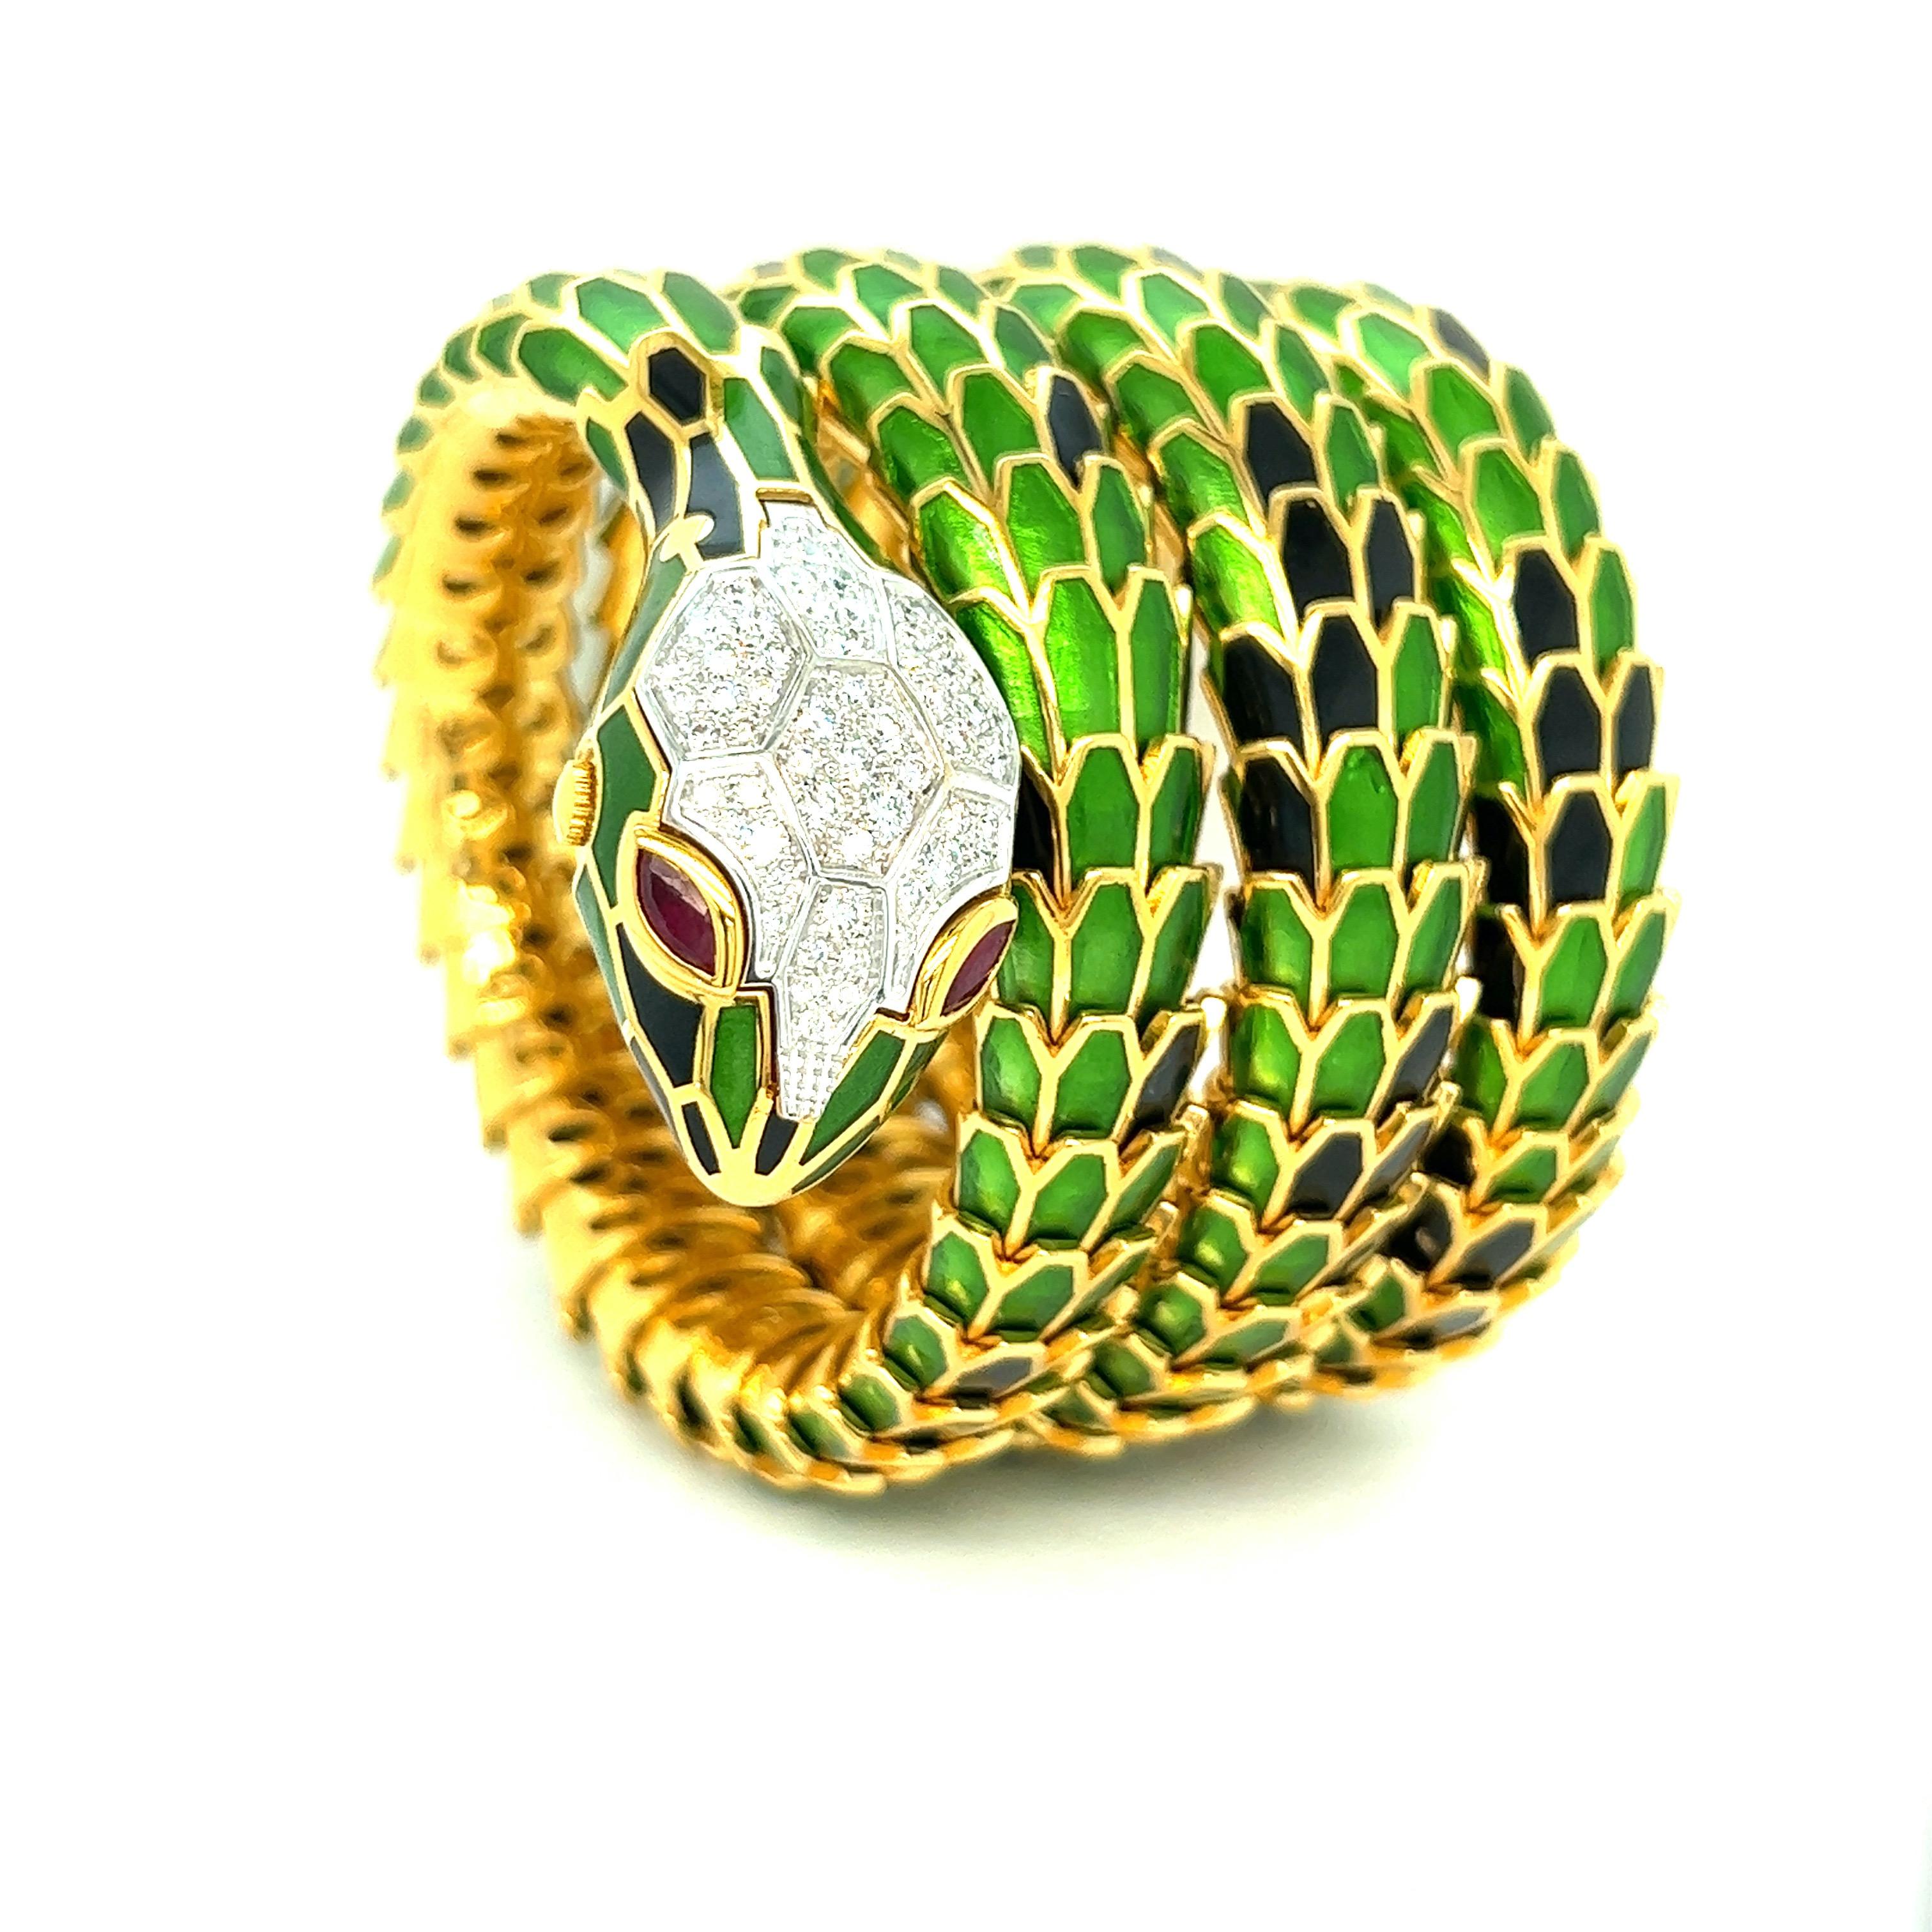 Green and black enamel snake watch wrap bracelet, 4 rows

Round-cut diamonds of 1.10 carats, Marquise-shaped rubies of 0.56 carat, 18 karat white gold, silver with a tone of yellow gold; marked 750, 925, D. 1.10, R. 0.56, BW007Y4M09MBK-0167

Size: